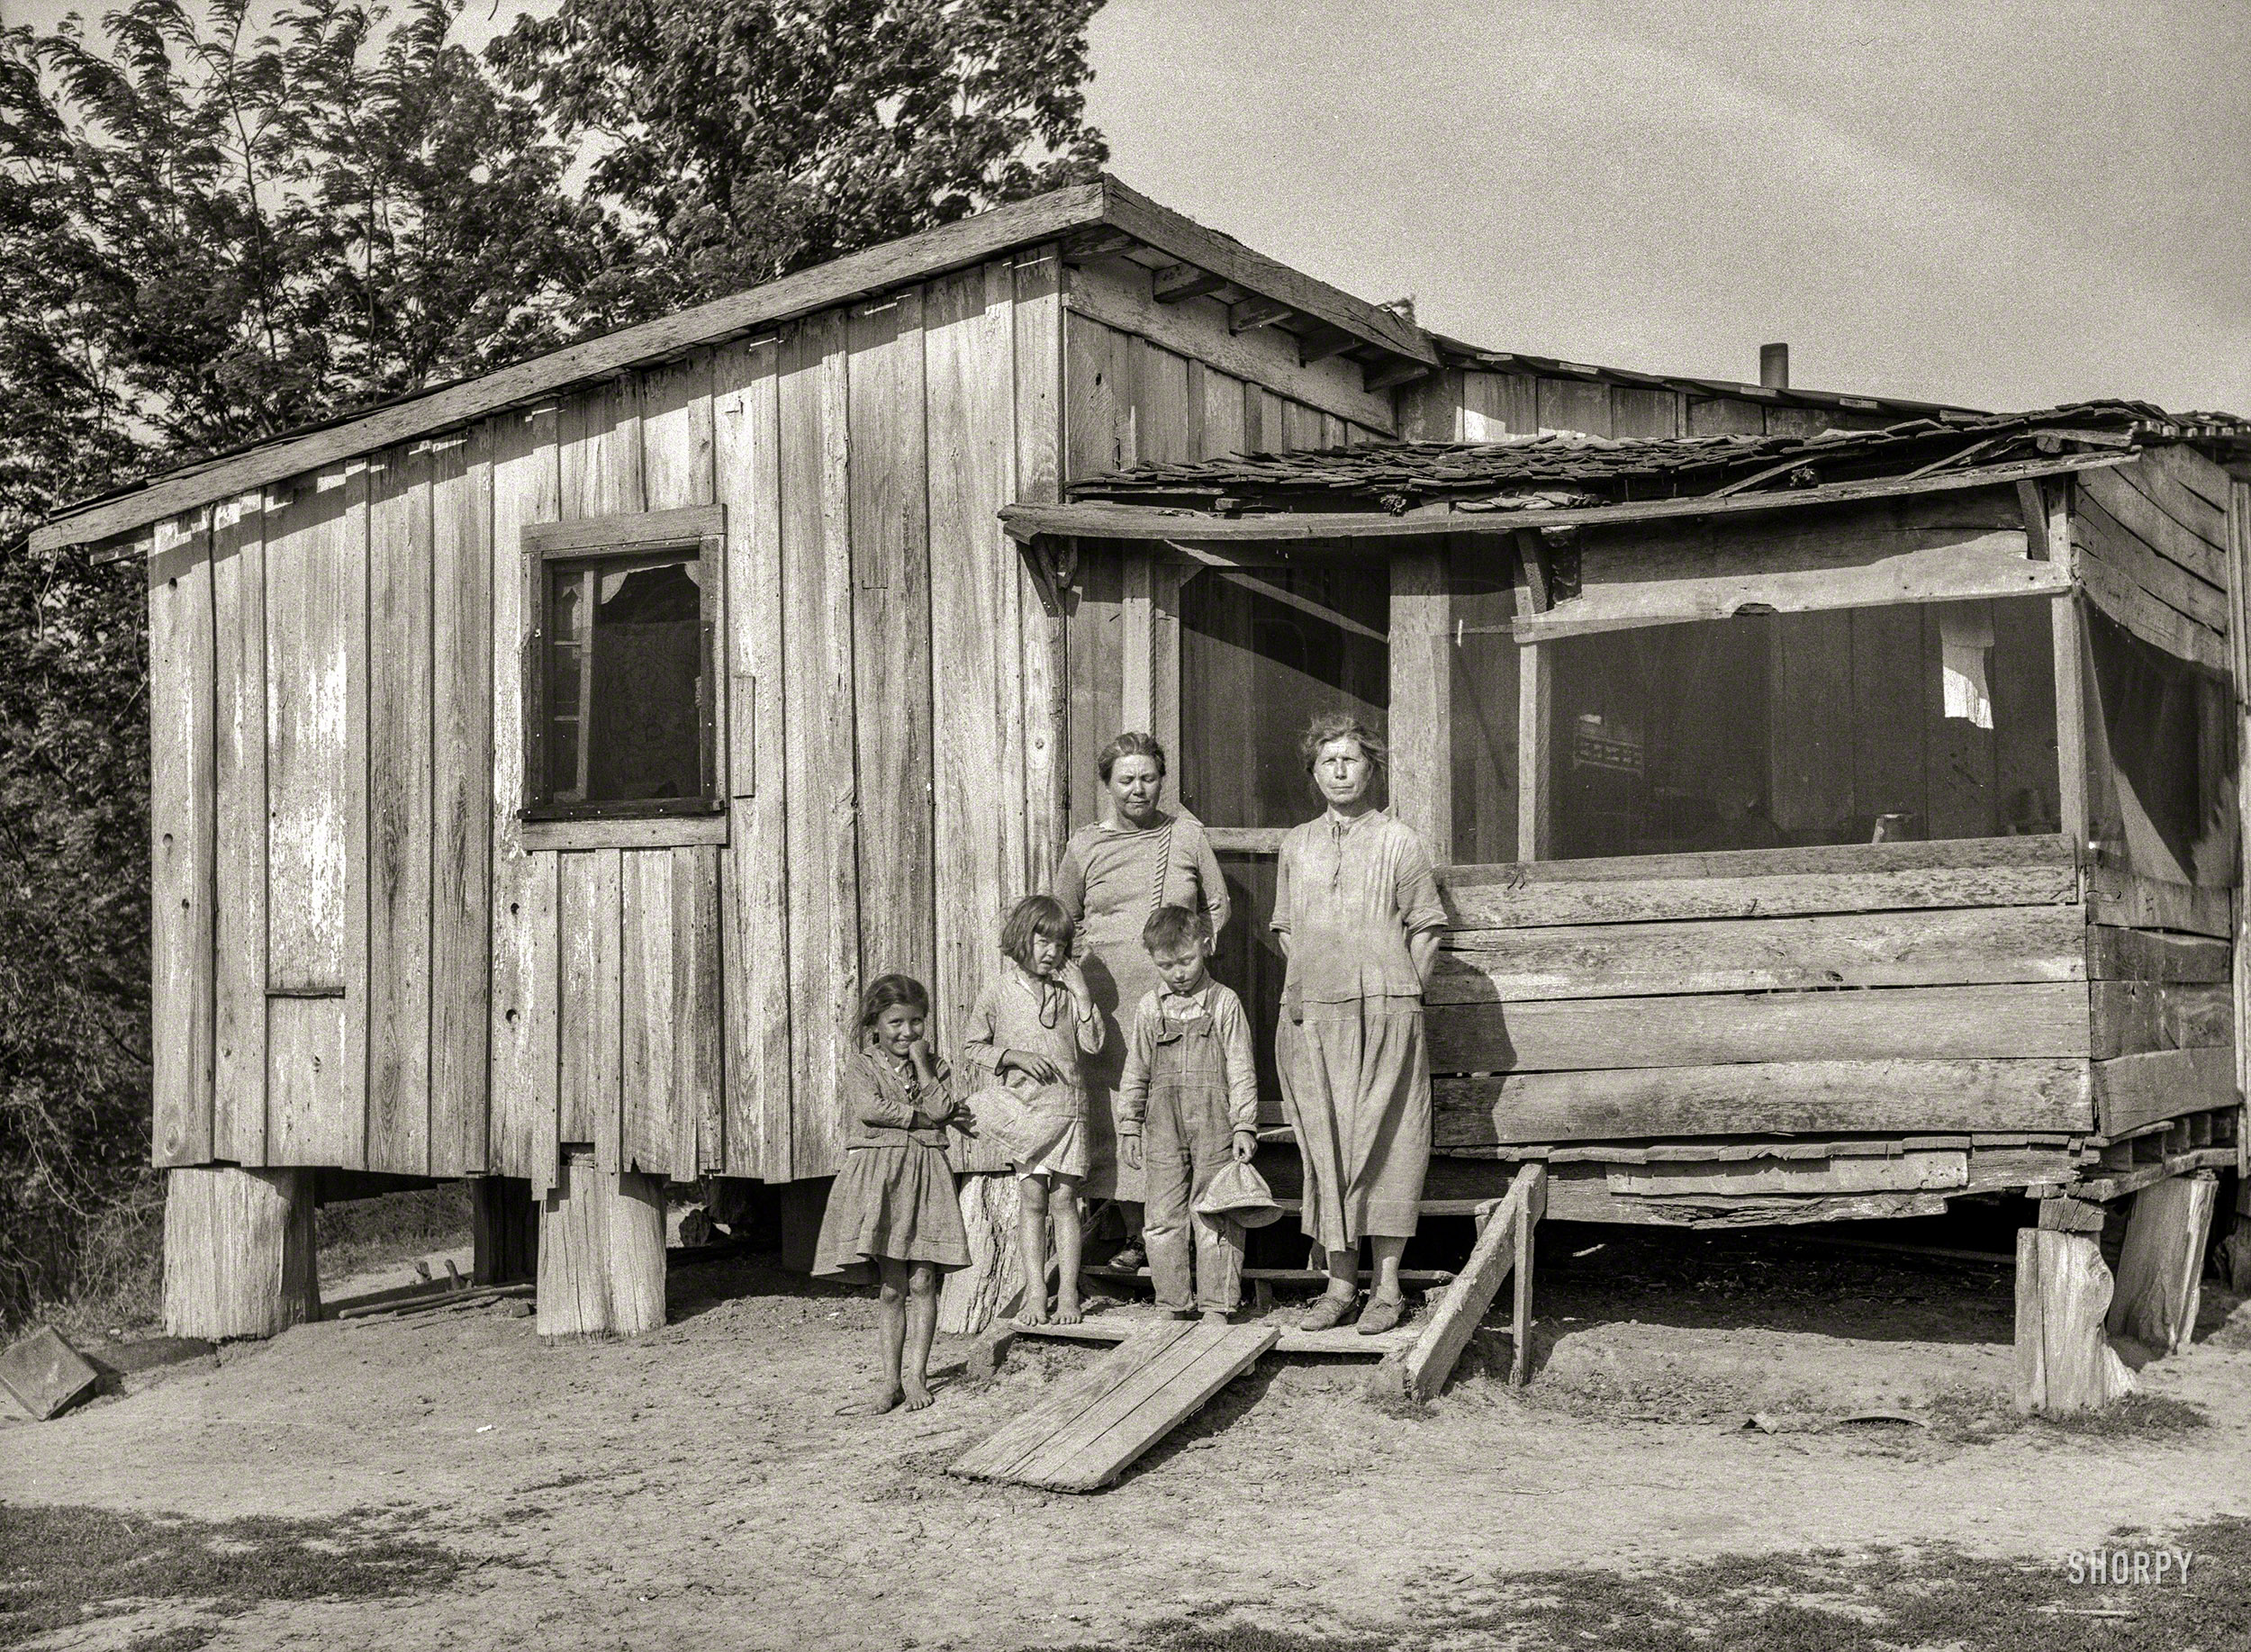 May 1936. "Sharecropper's family in Mississippi County, Missouri. Typical sharecropper shack with crop entirely surrounding house." Medium format nitrate negative by Carl Mydans for the Resettlement Administration. View full size.